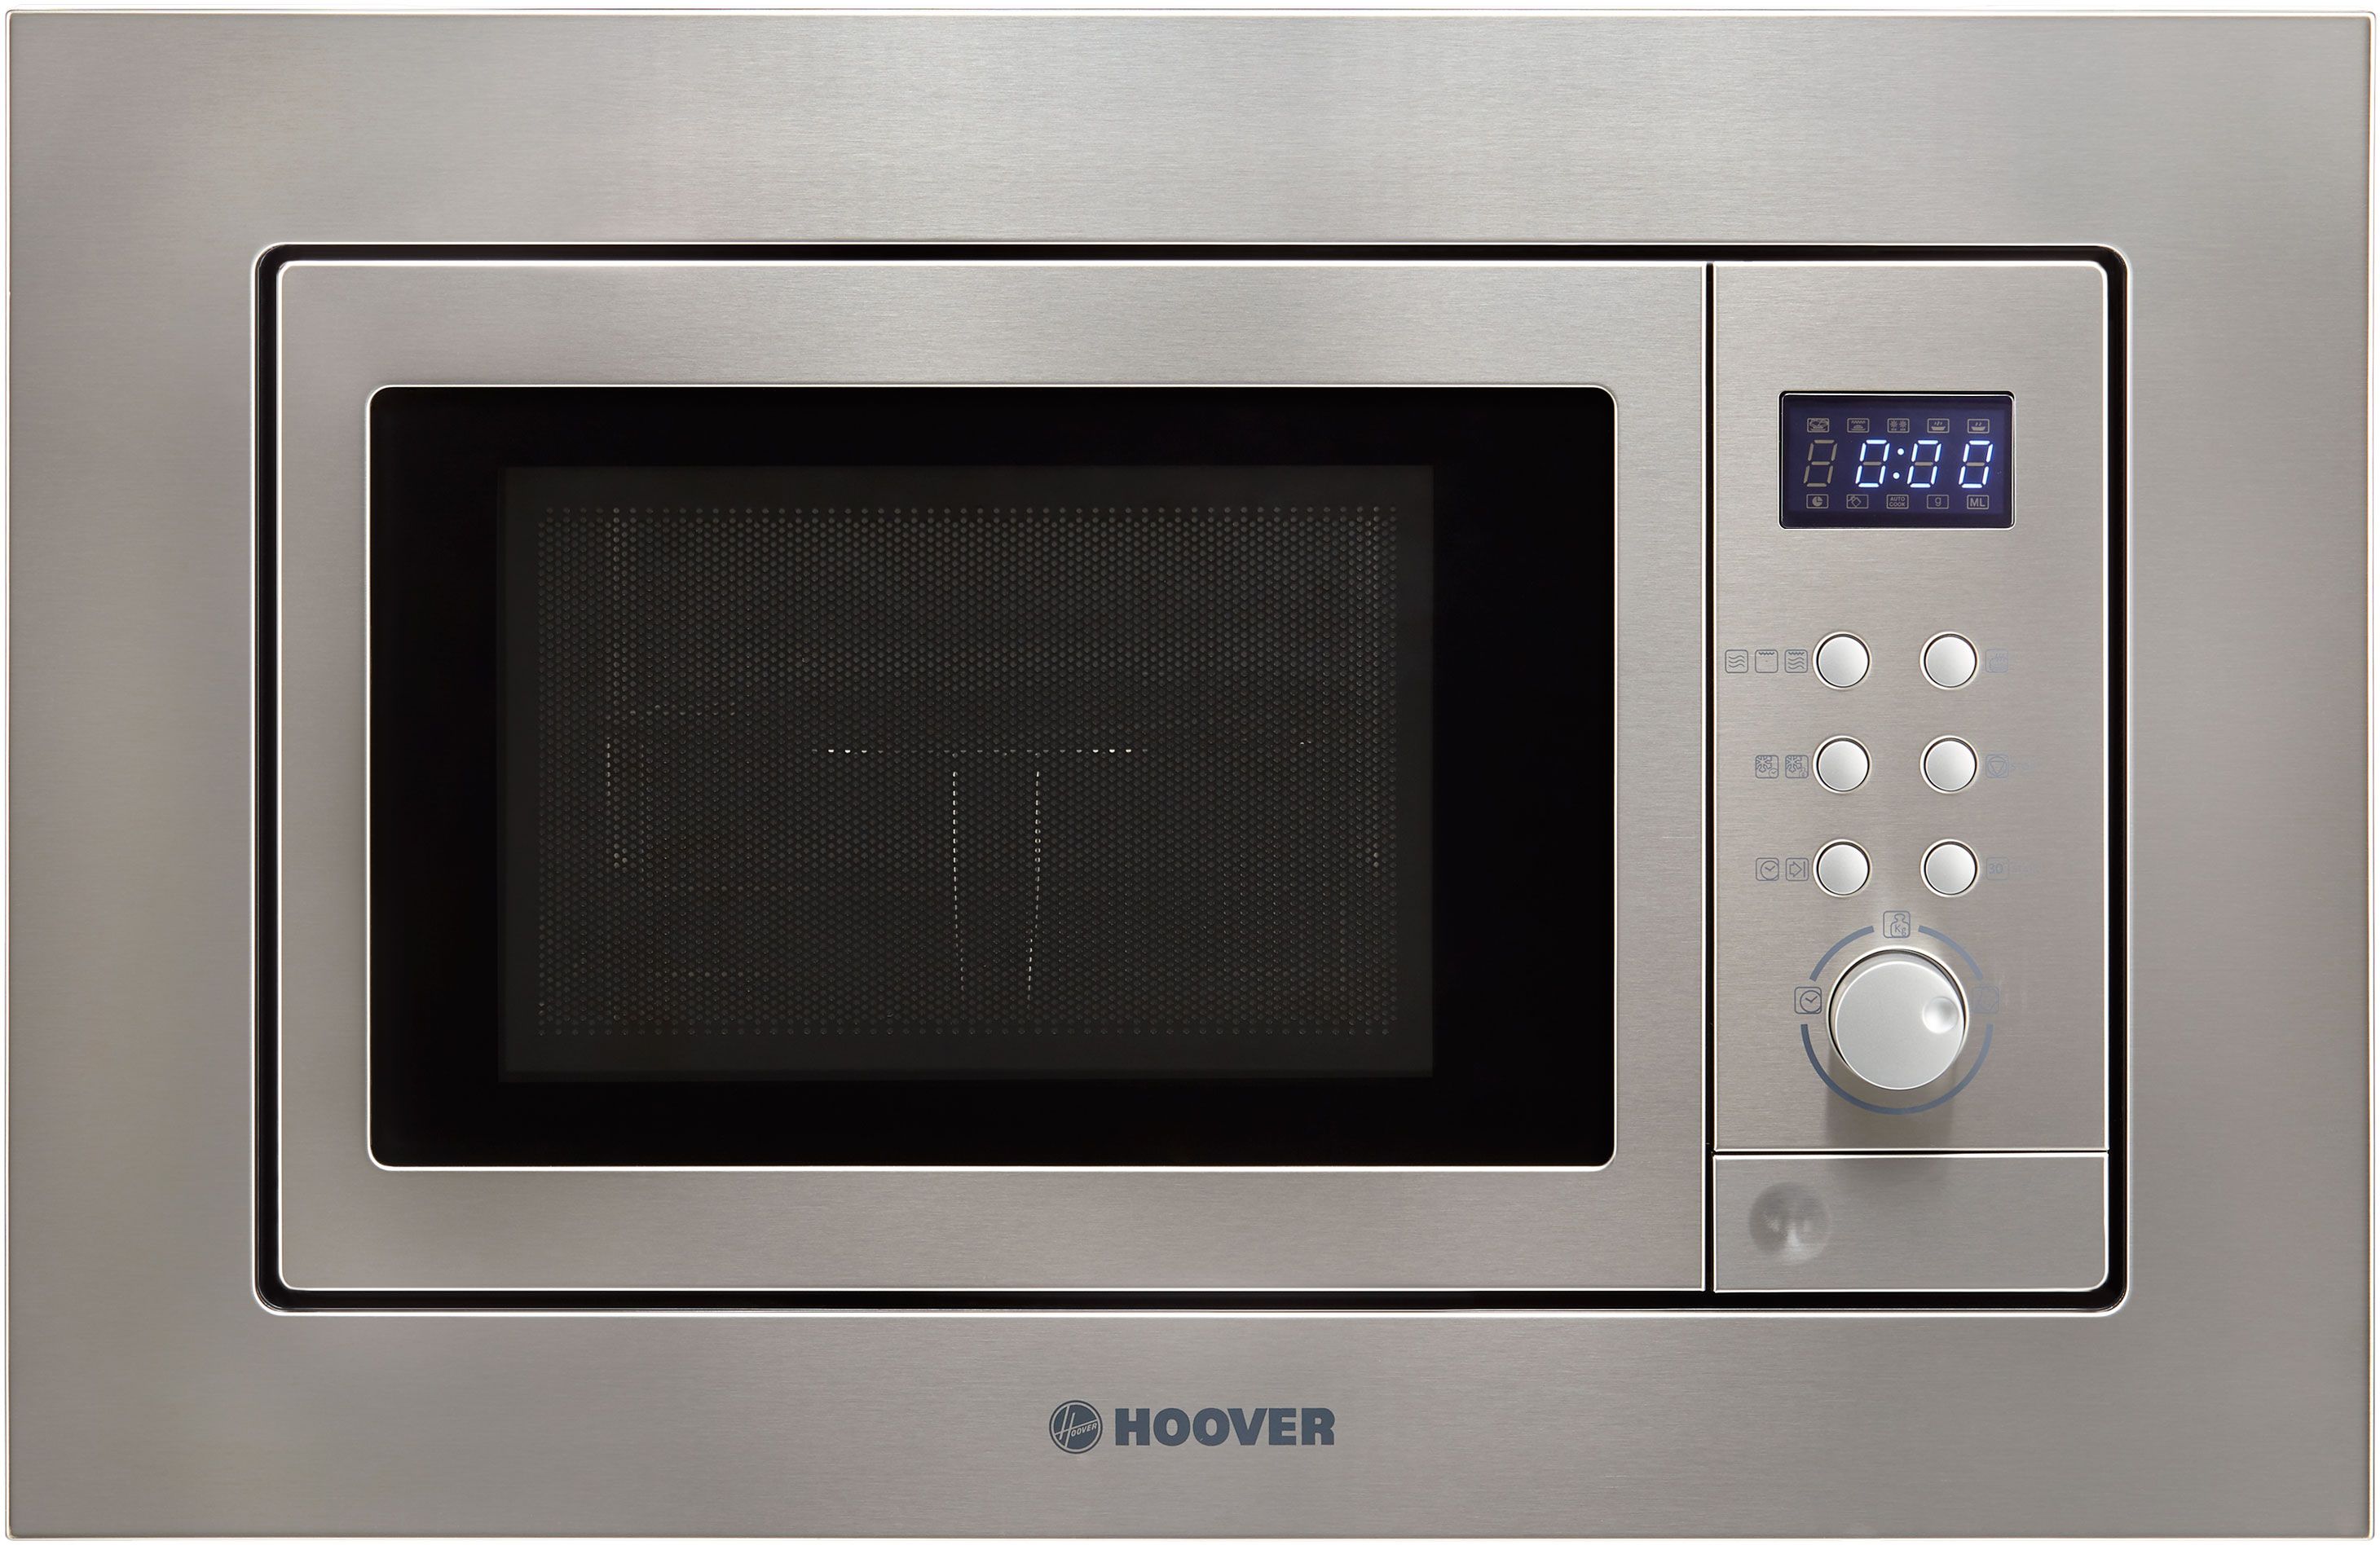 Hoover H-MICROWAVE 100 HM20GX 38cm tall, 60cm wide, Built In Compact Microwave - Stainless Steel, Stainless Steel